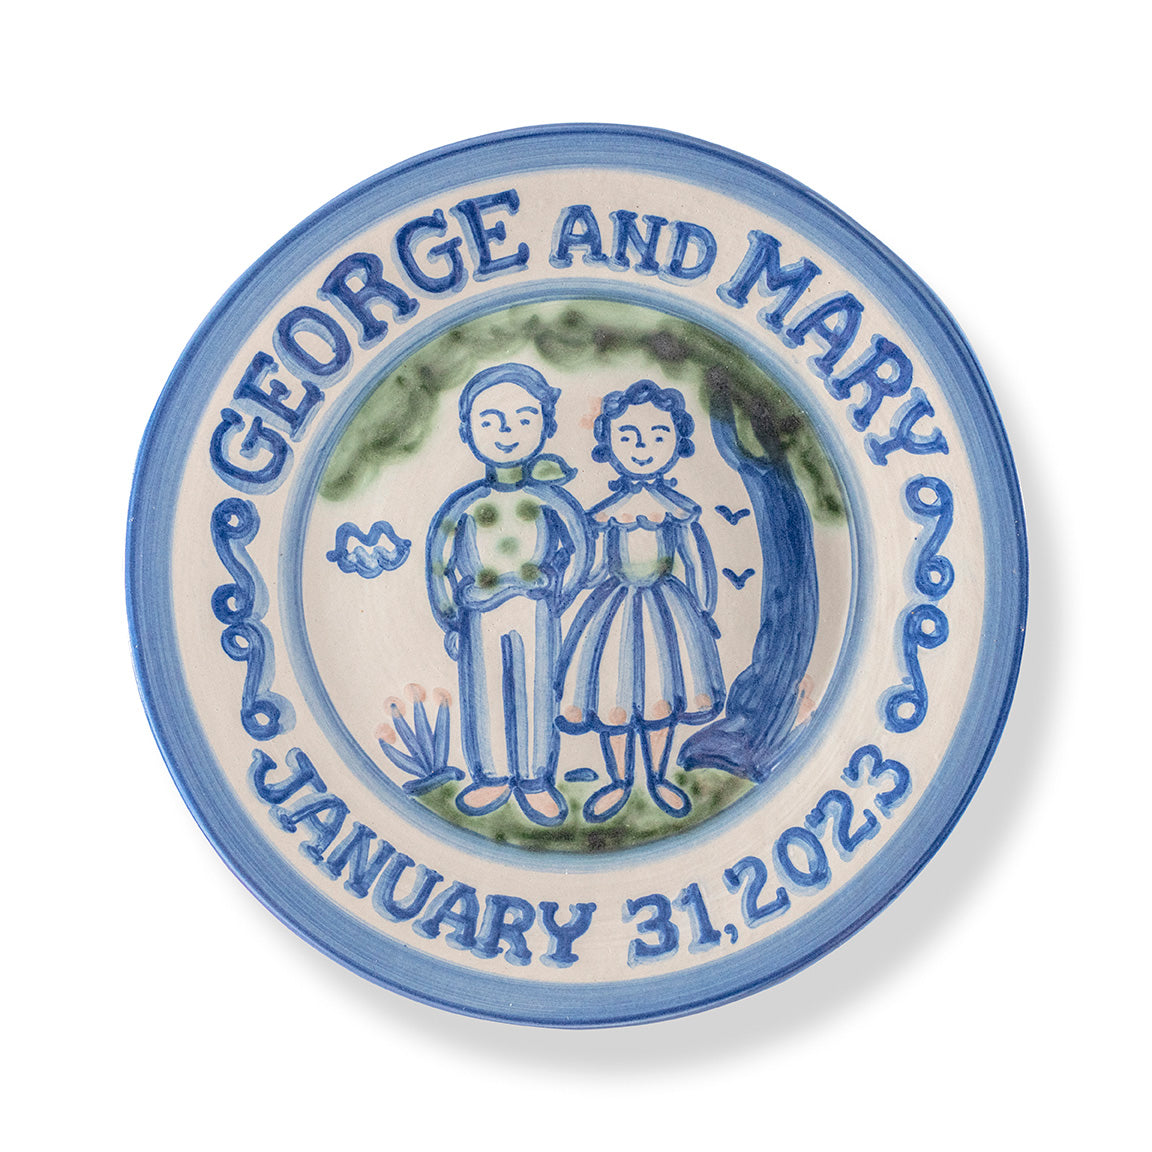 Personalized Wedding Plate - Country Couple